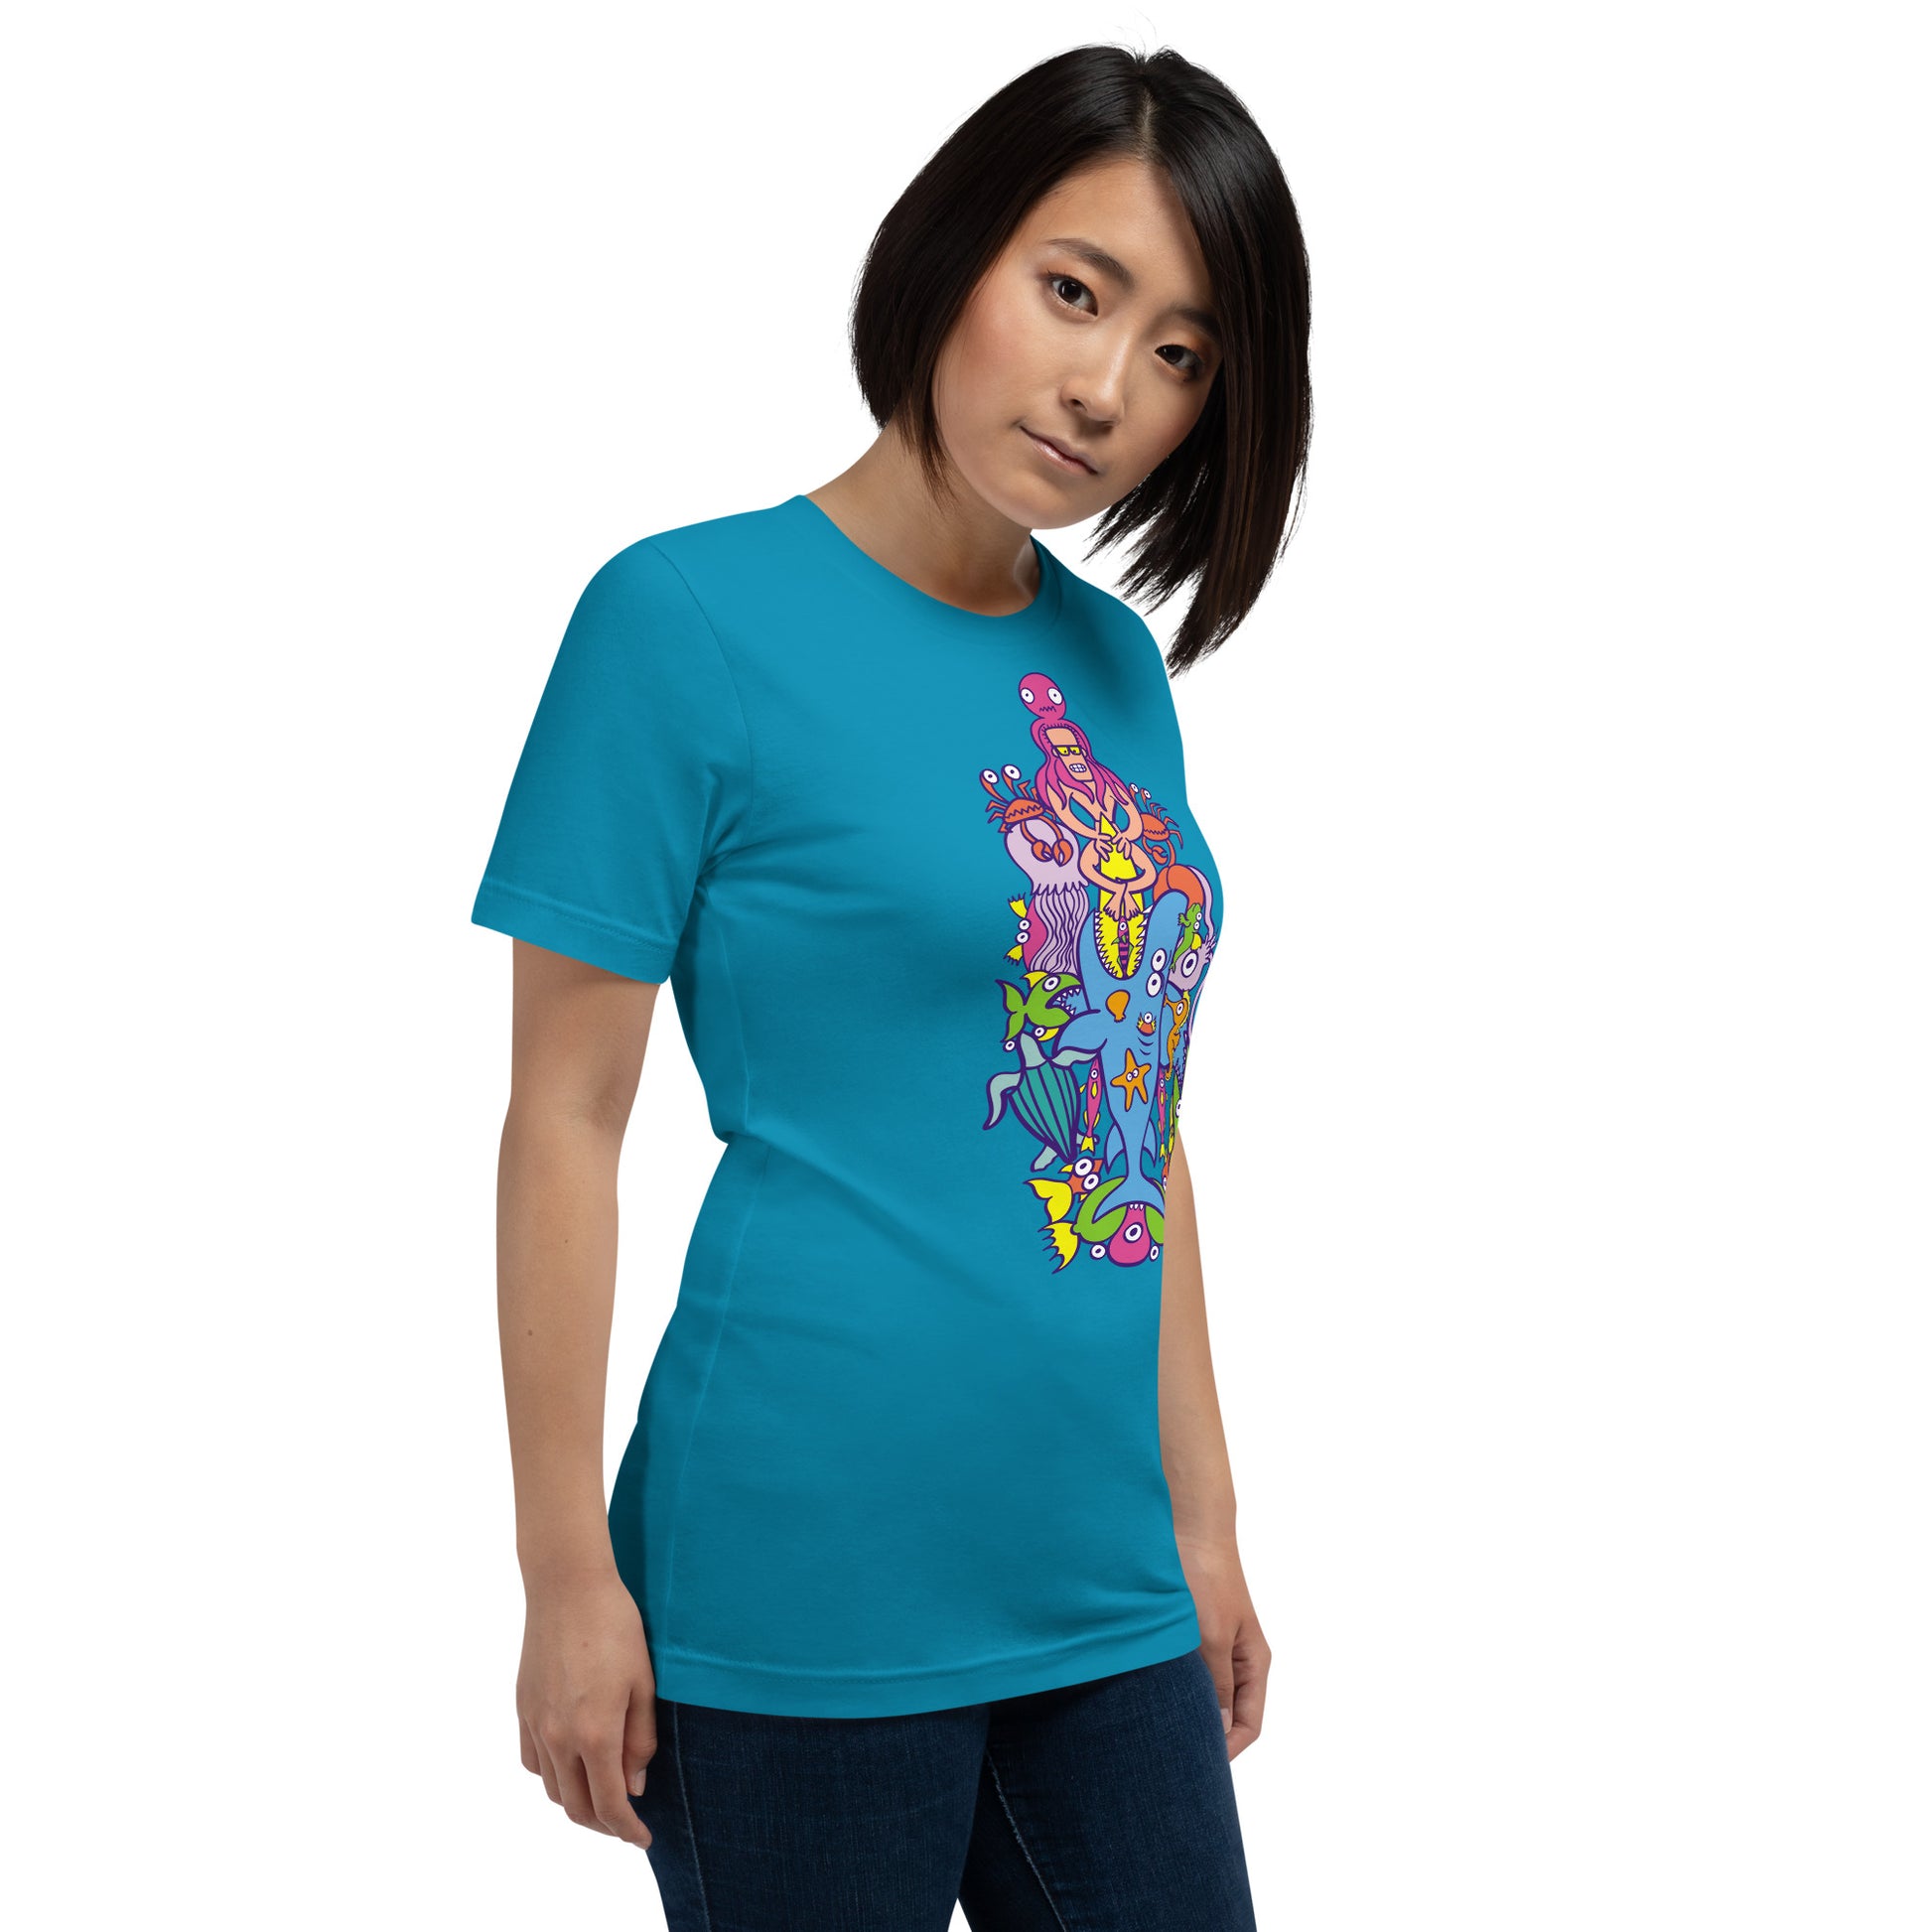 Surfing is a true extreme sport Unisex t-shirt. Woman wearing an aqua color model